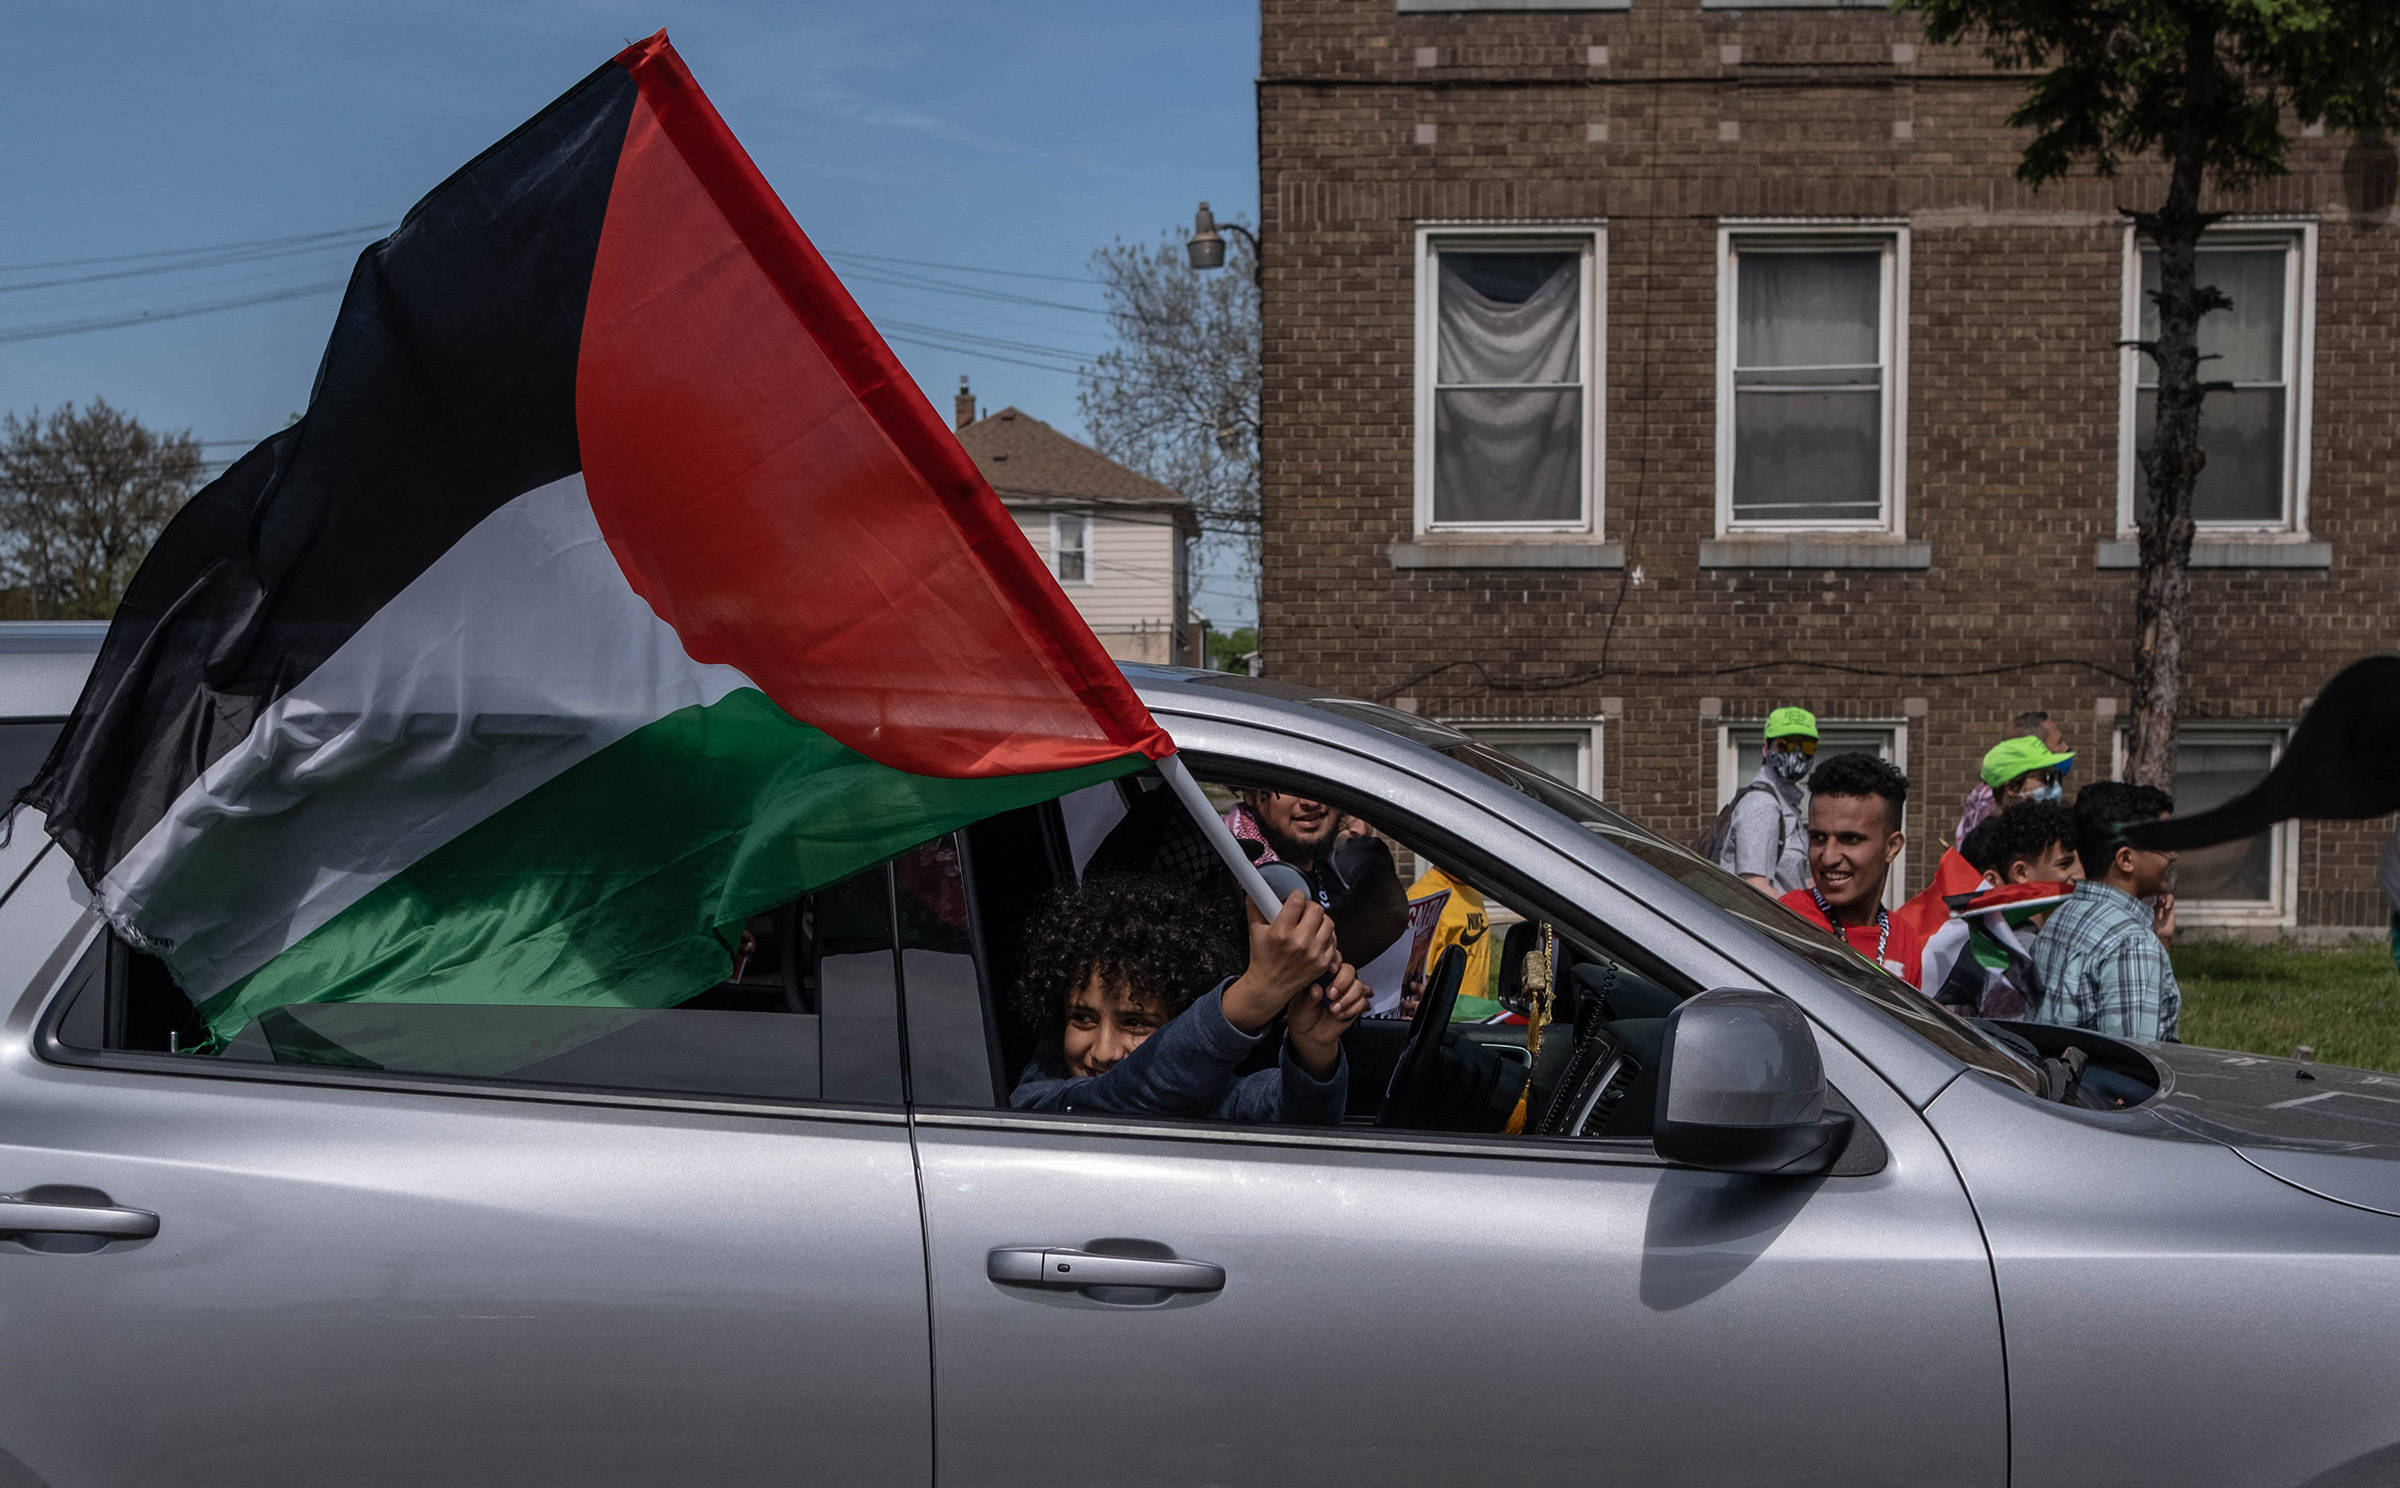 A protester waves a Palestinian flag during a march through neighborhoods near a Ford plant where U.S. President Joe Biden was touring in Dearborn, Mich., on May 18. (Seth Herald—AFP/Getty Images)